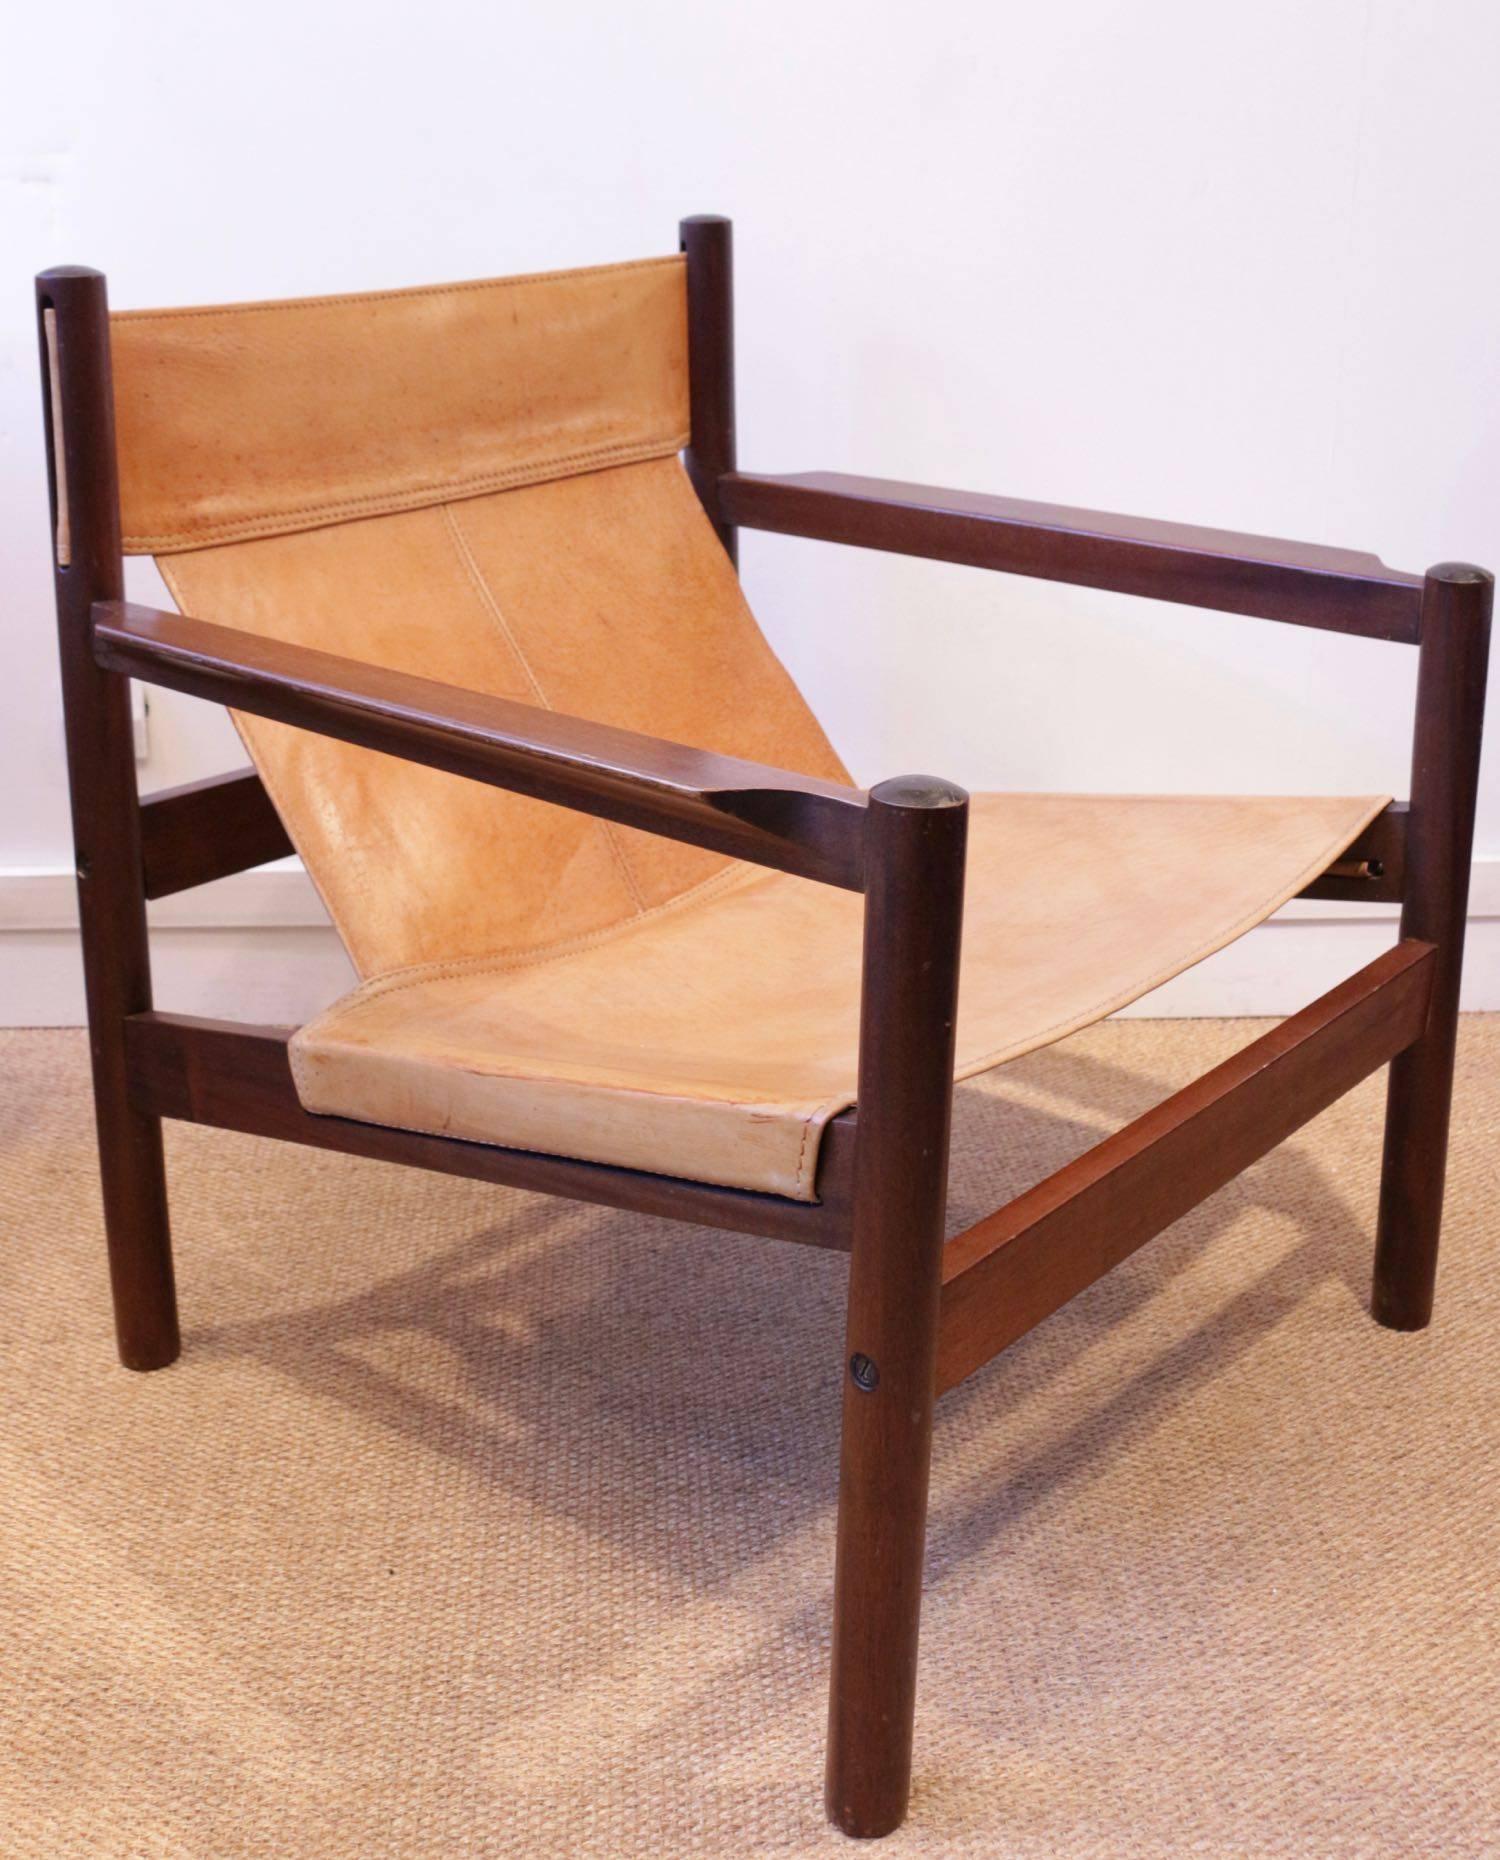 Very elegant and comfortable pair of safari armchairs by Michel Arnoult, 1960s.
Light brown leather.